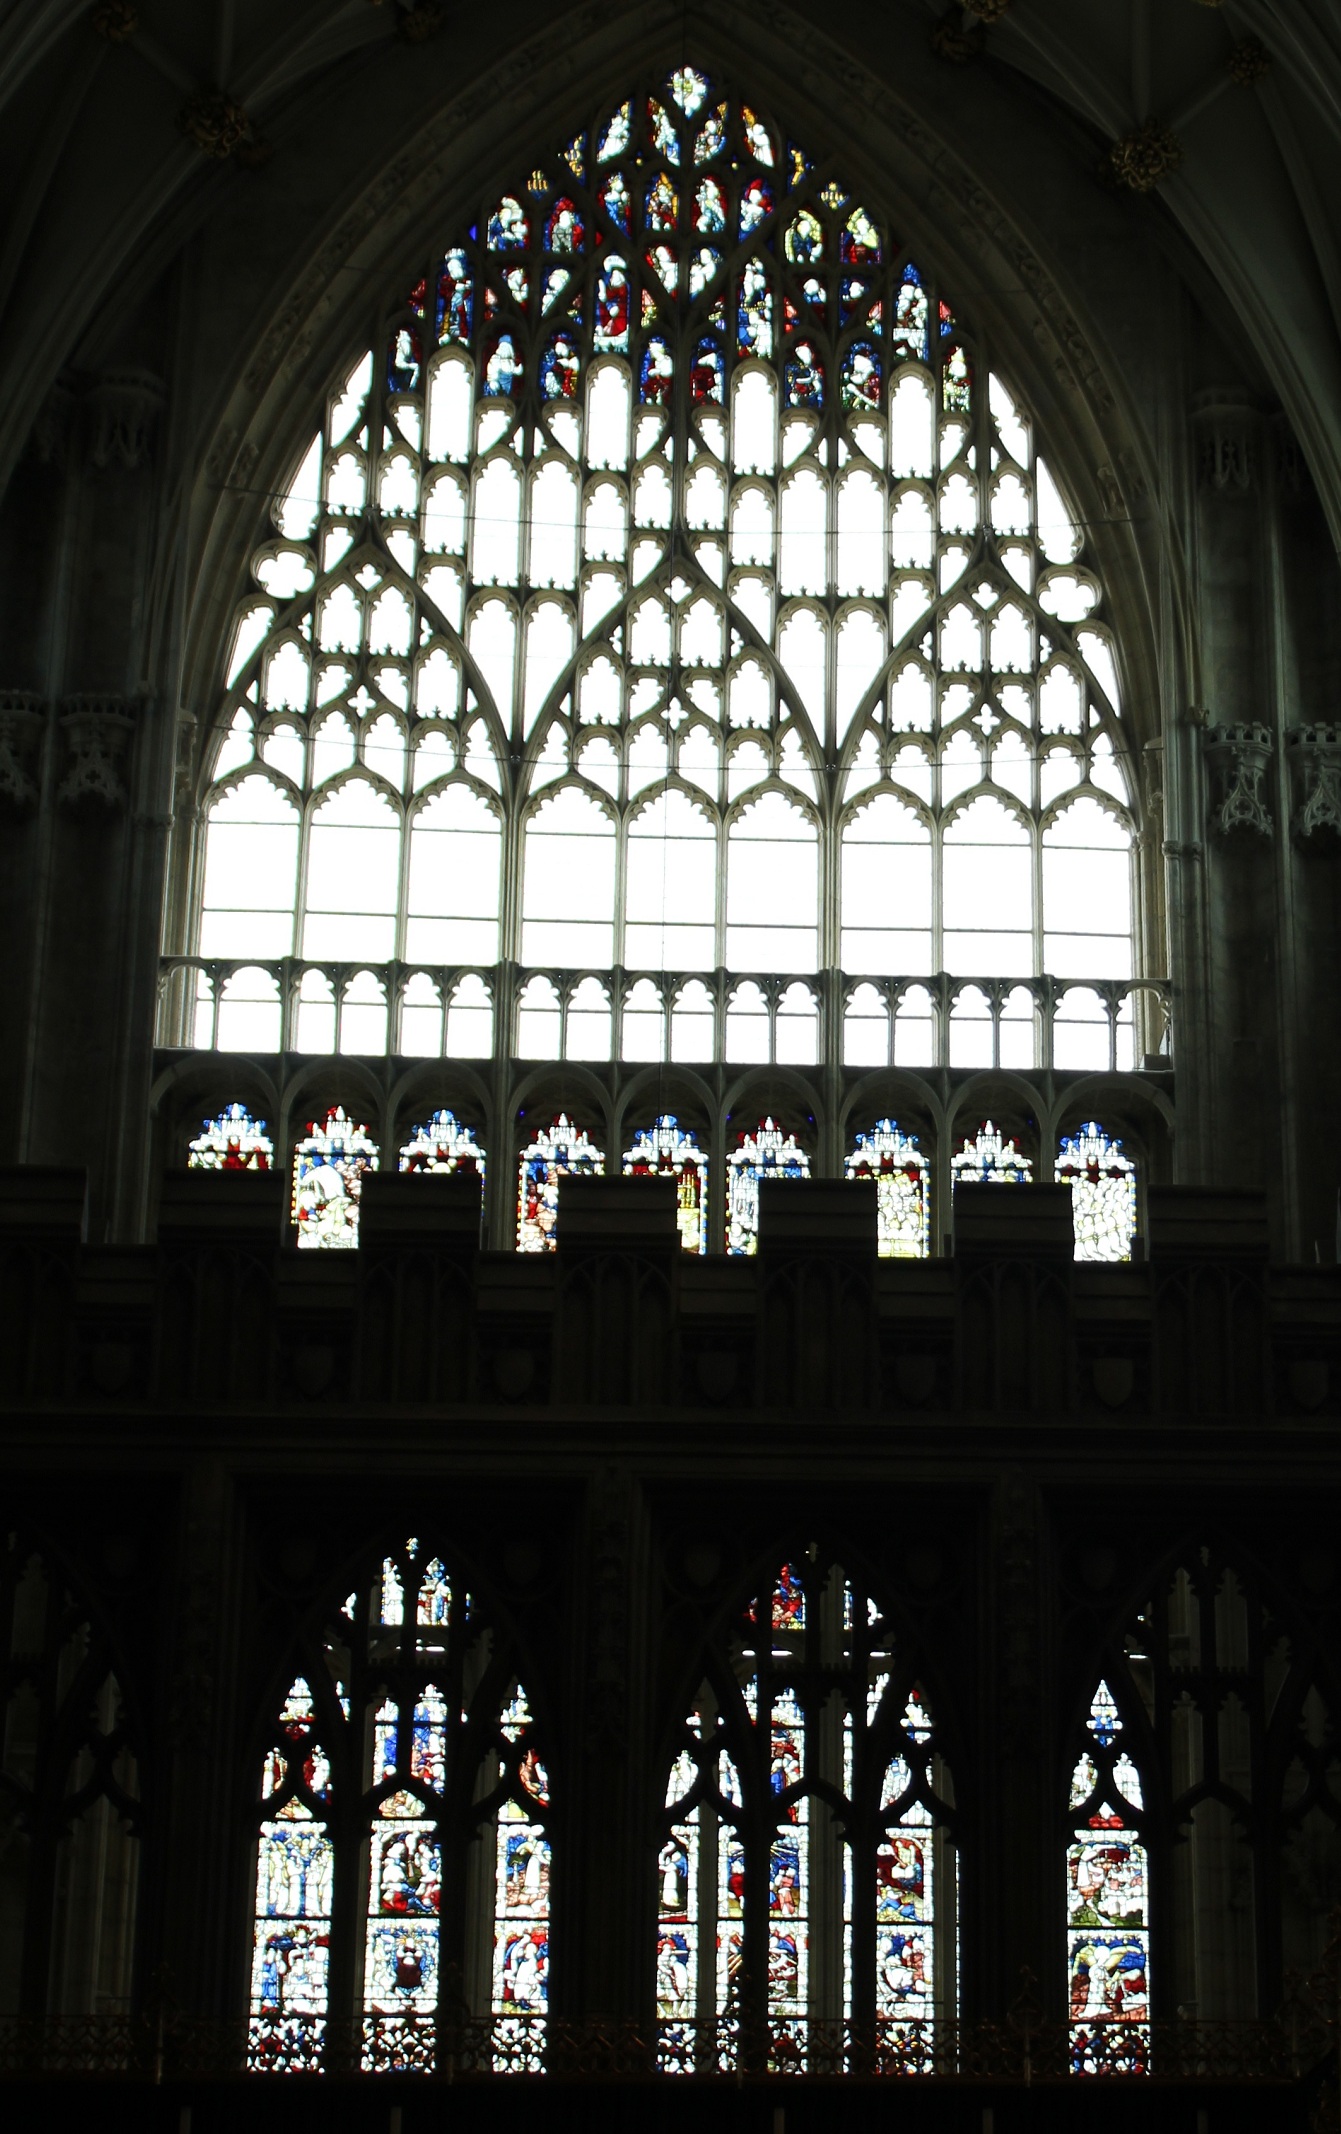 Image of the Great East Window at York Minster. Some of the glass is currently plain while the Medieval stained glass is conserved.